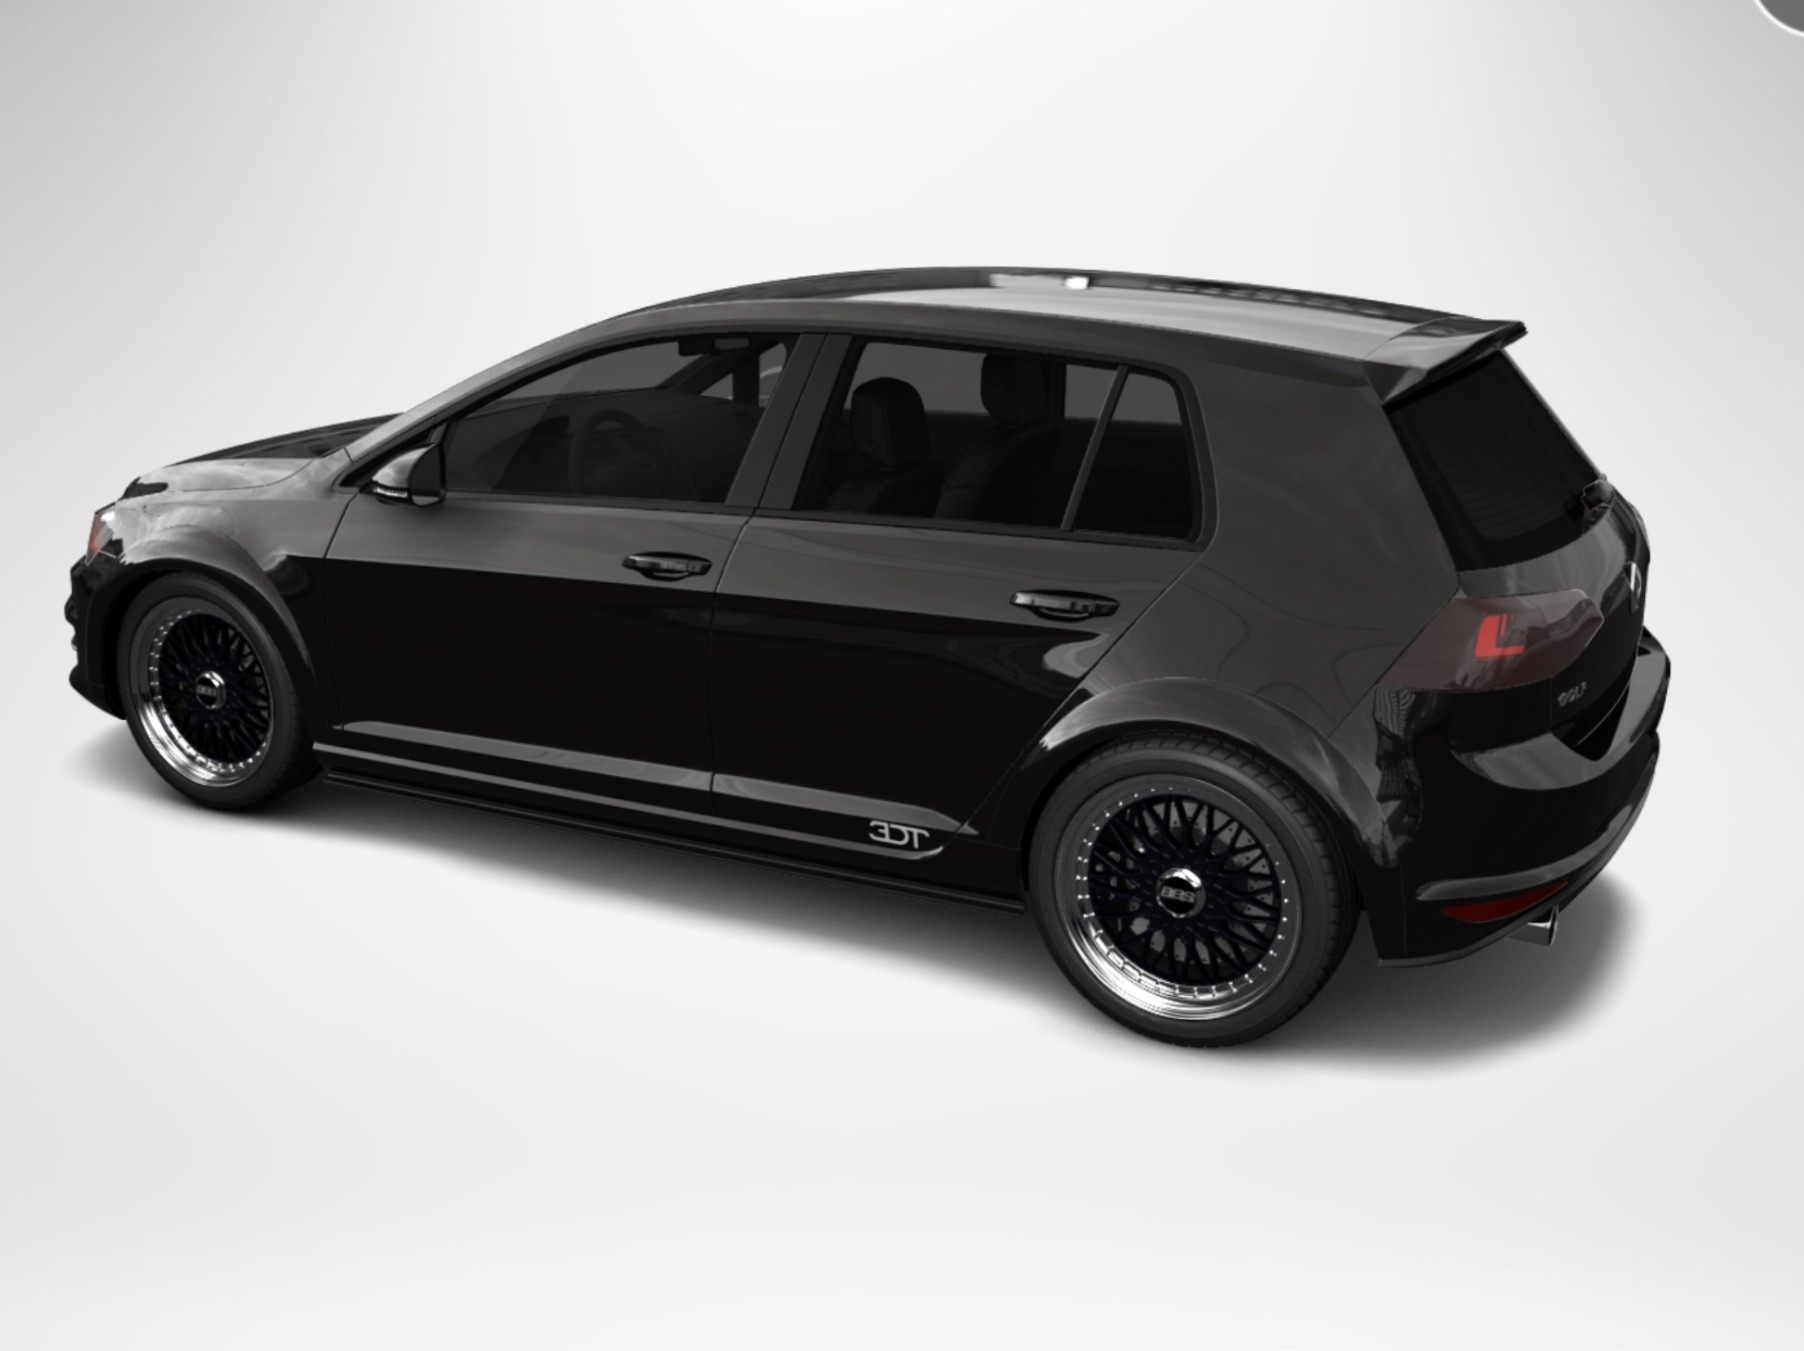 Golf TDI to GTI TDI conversion thread. !!! Warning Picture Heavy !!!, Page  4